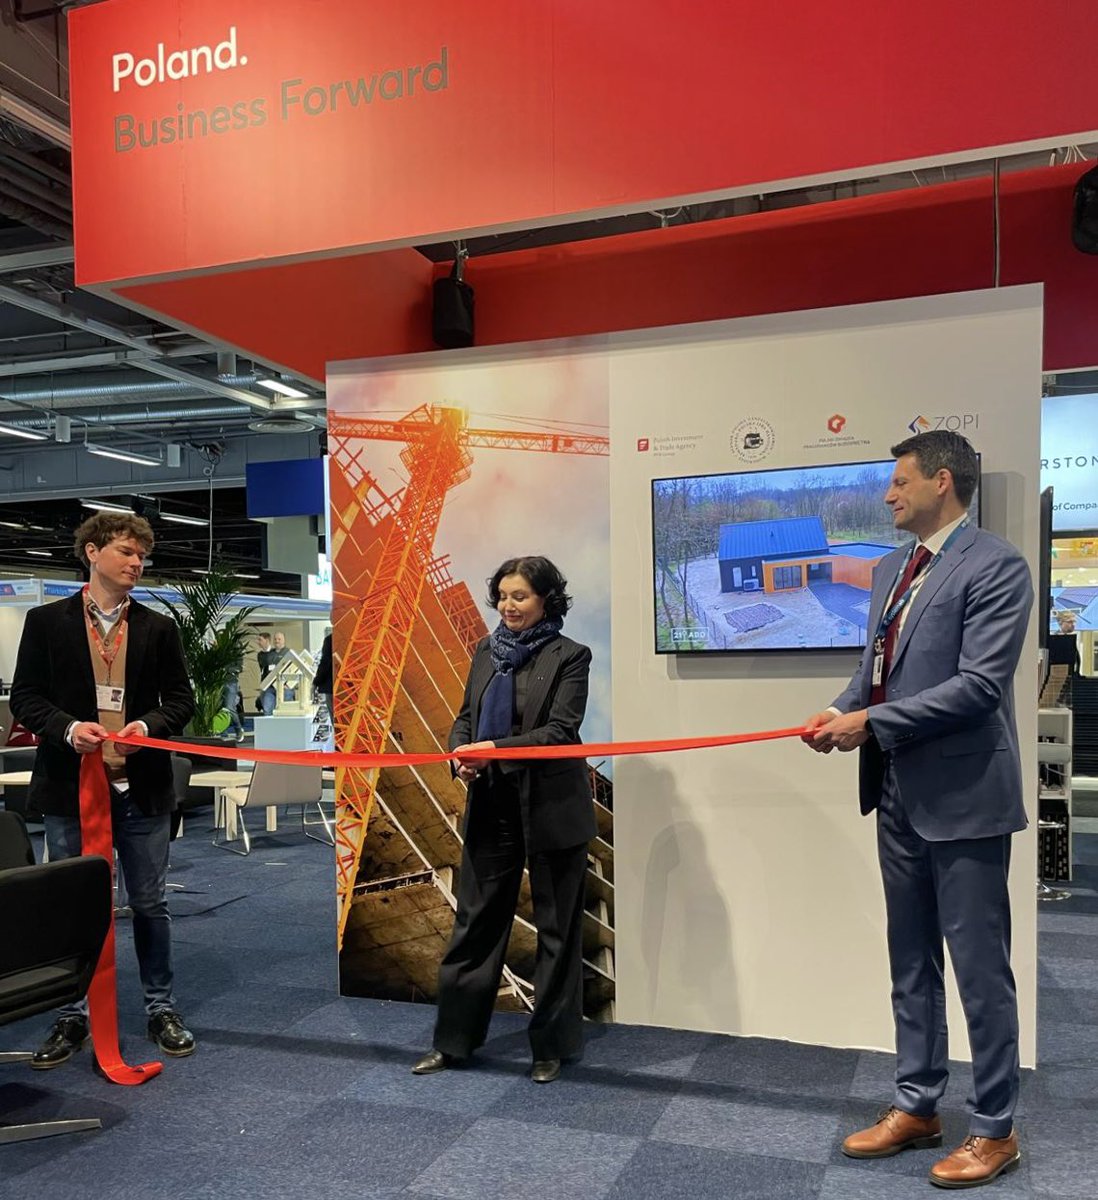 Yesterday, @ambJHofman opened the 🇵🇱 pavilion organised by the @PAIH_pl office in Stockholm at the #Nordbygg building and construction industry fair. 🏗️

At the fair, some 30 companies from 🇵🇱 presented their wide-ranging offer and innovative solutions to potential 🇸🇪 partners.